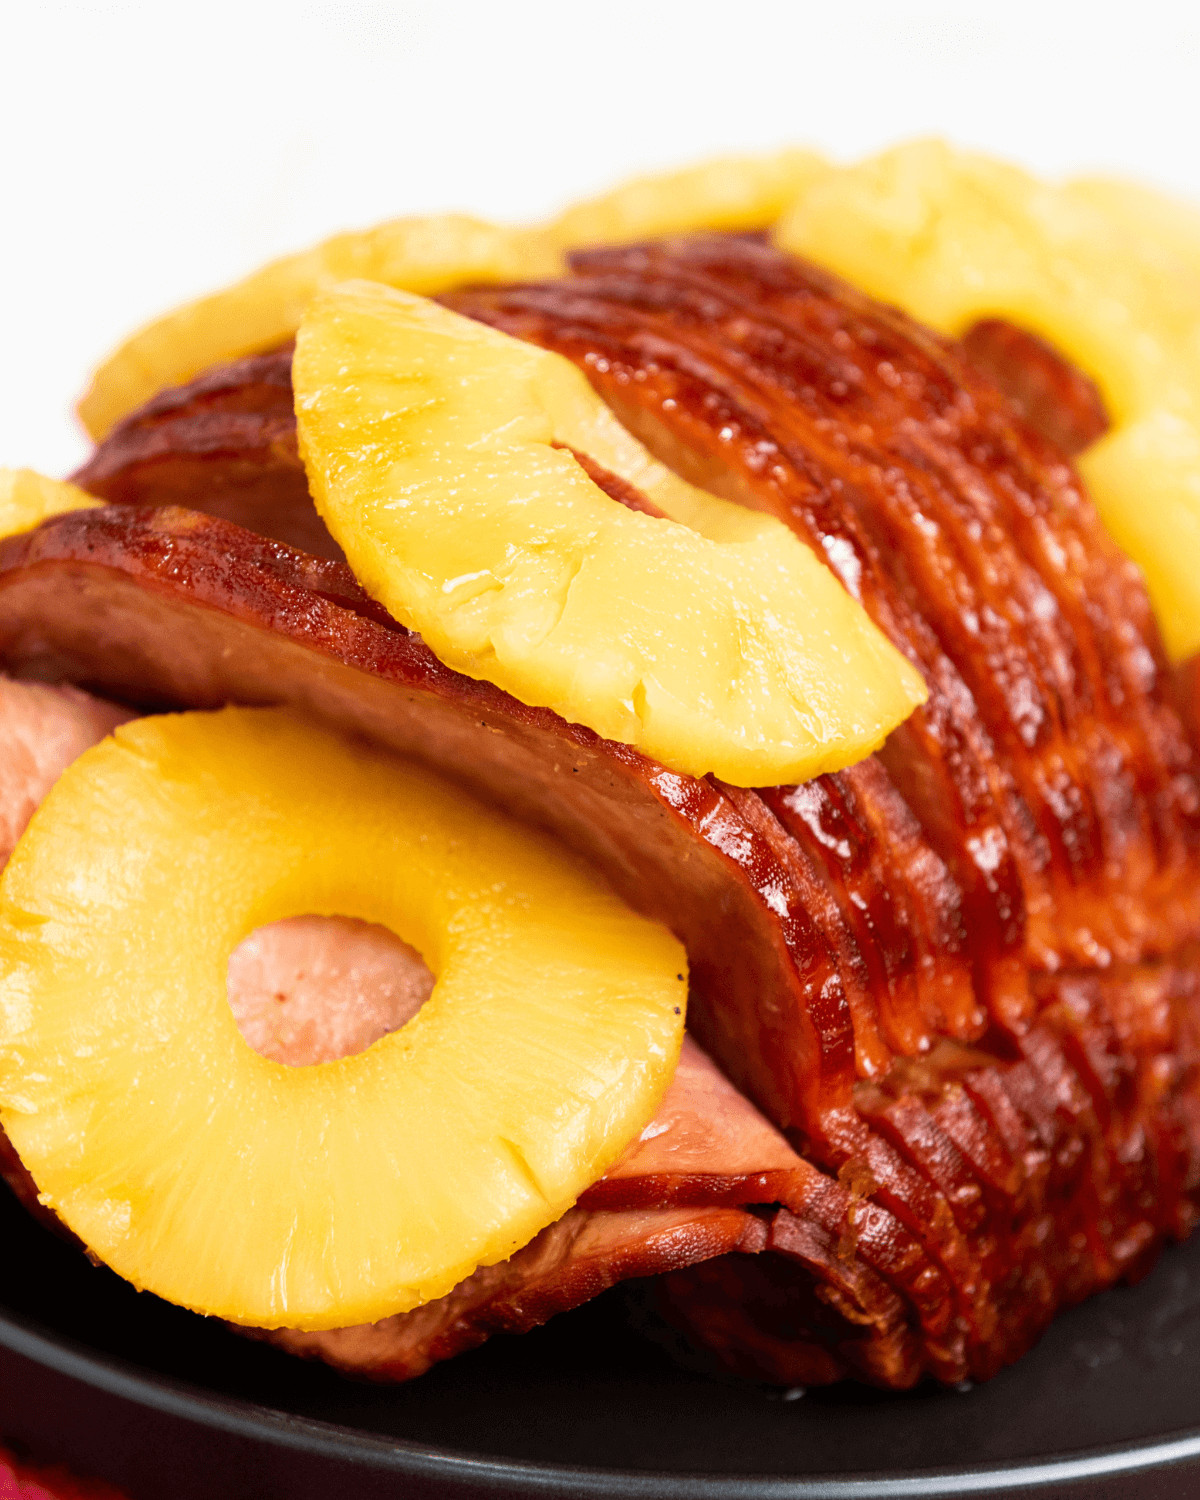 A ham with pineapple and brown sugar cooked in the pressure cooker.